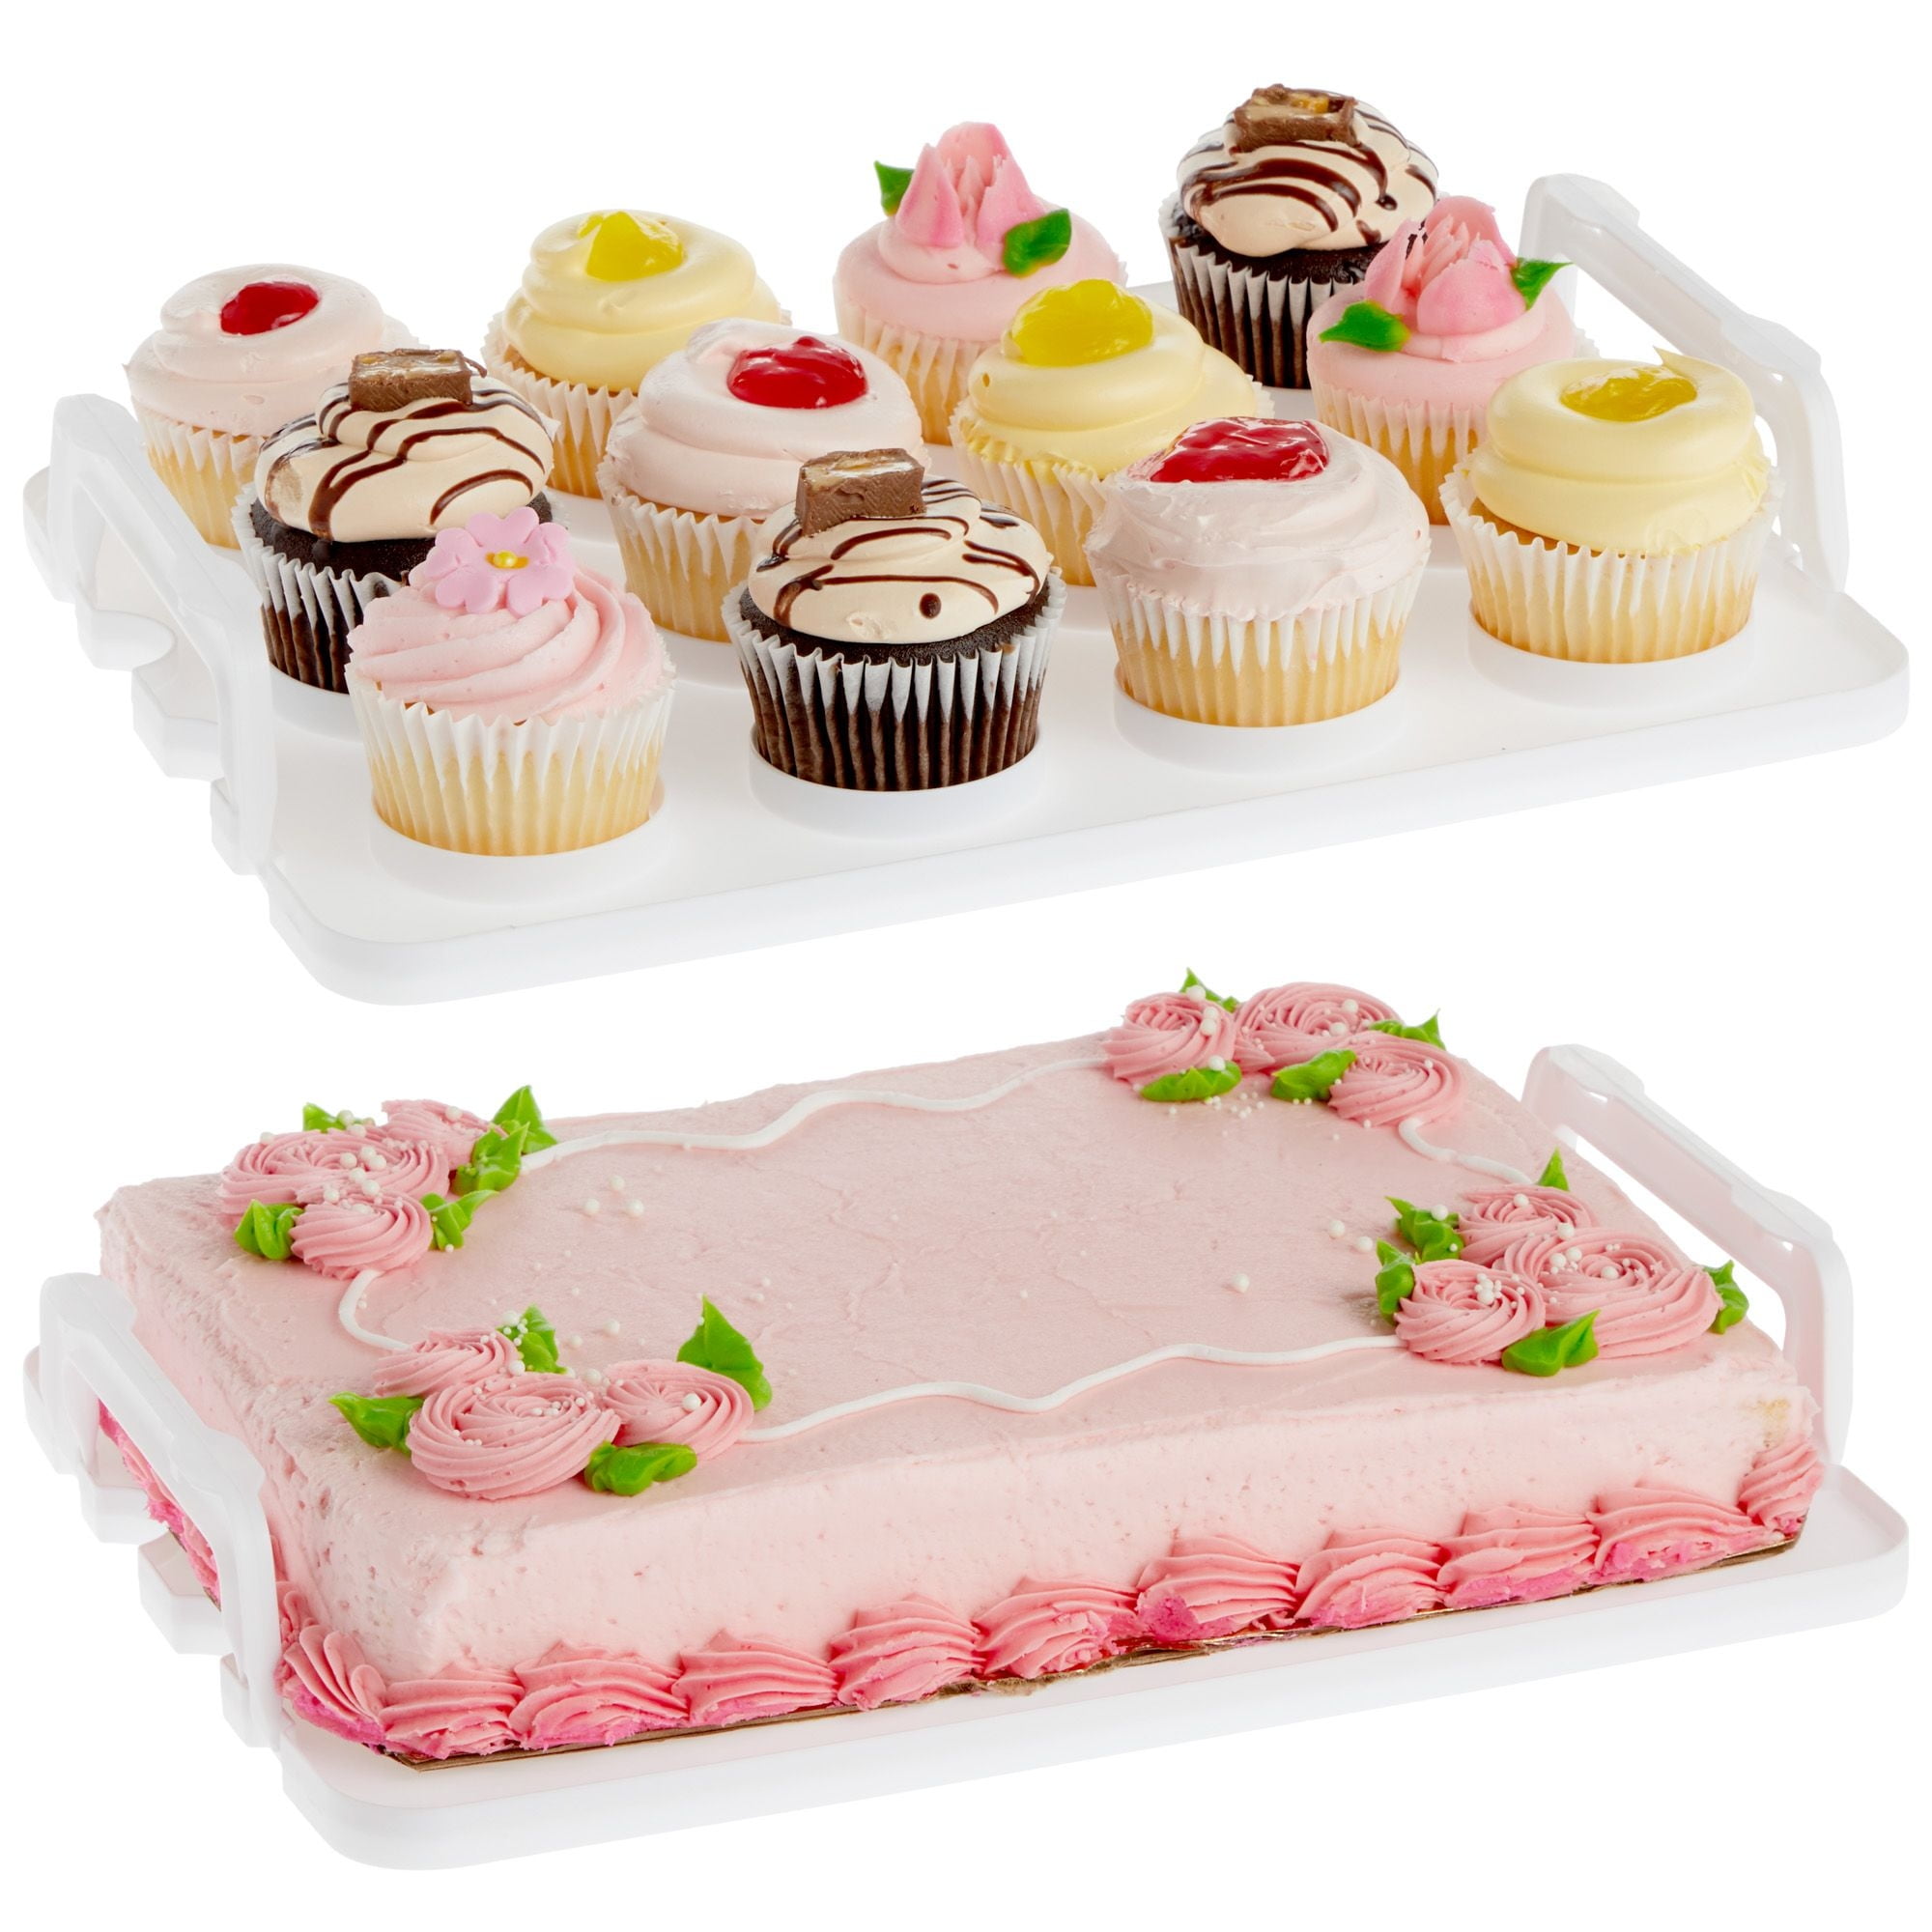  SOUJOY 2in1 Cupcake Carrier, Cupcake Keeper with Lid, Cupcake  Holder to Fit 12 Standard-Size Cupcakes, Portable Dessert Container  Transports Display Box for Cakes, Pies, Muffin : Home & Kitchen